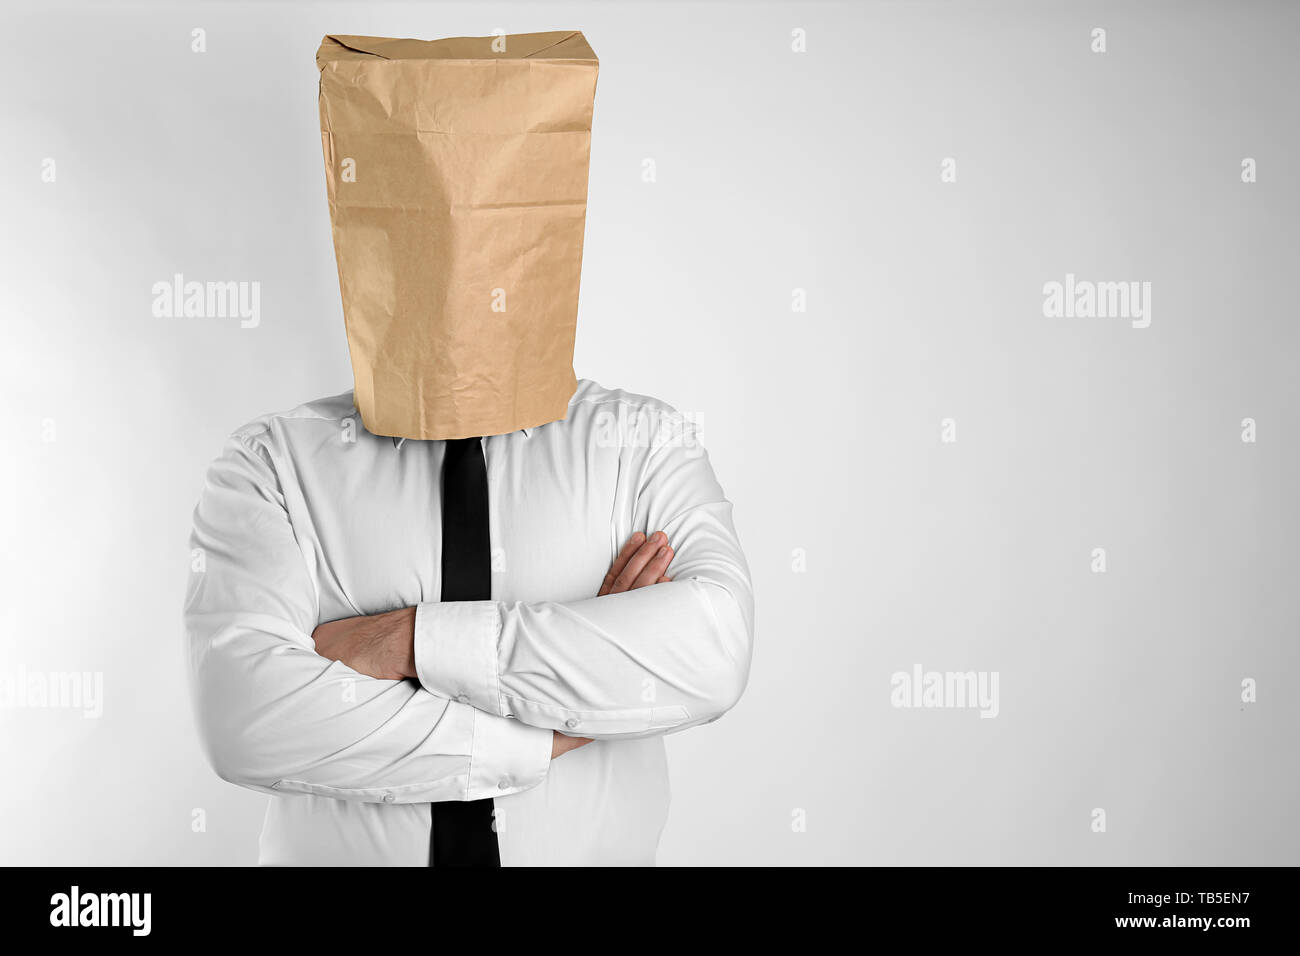 Businessman with paper bag on his head against light background Stock Photo